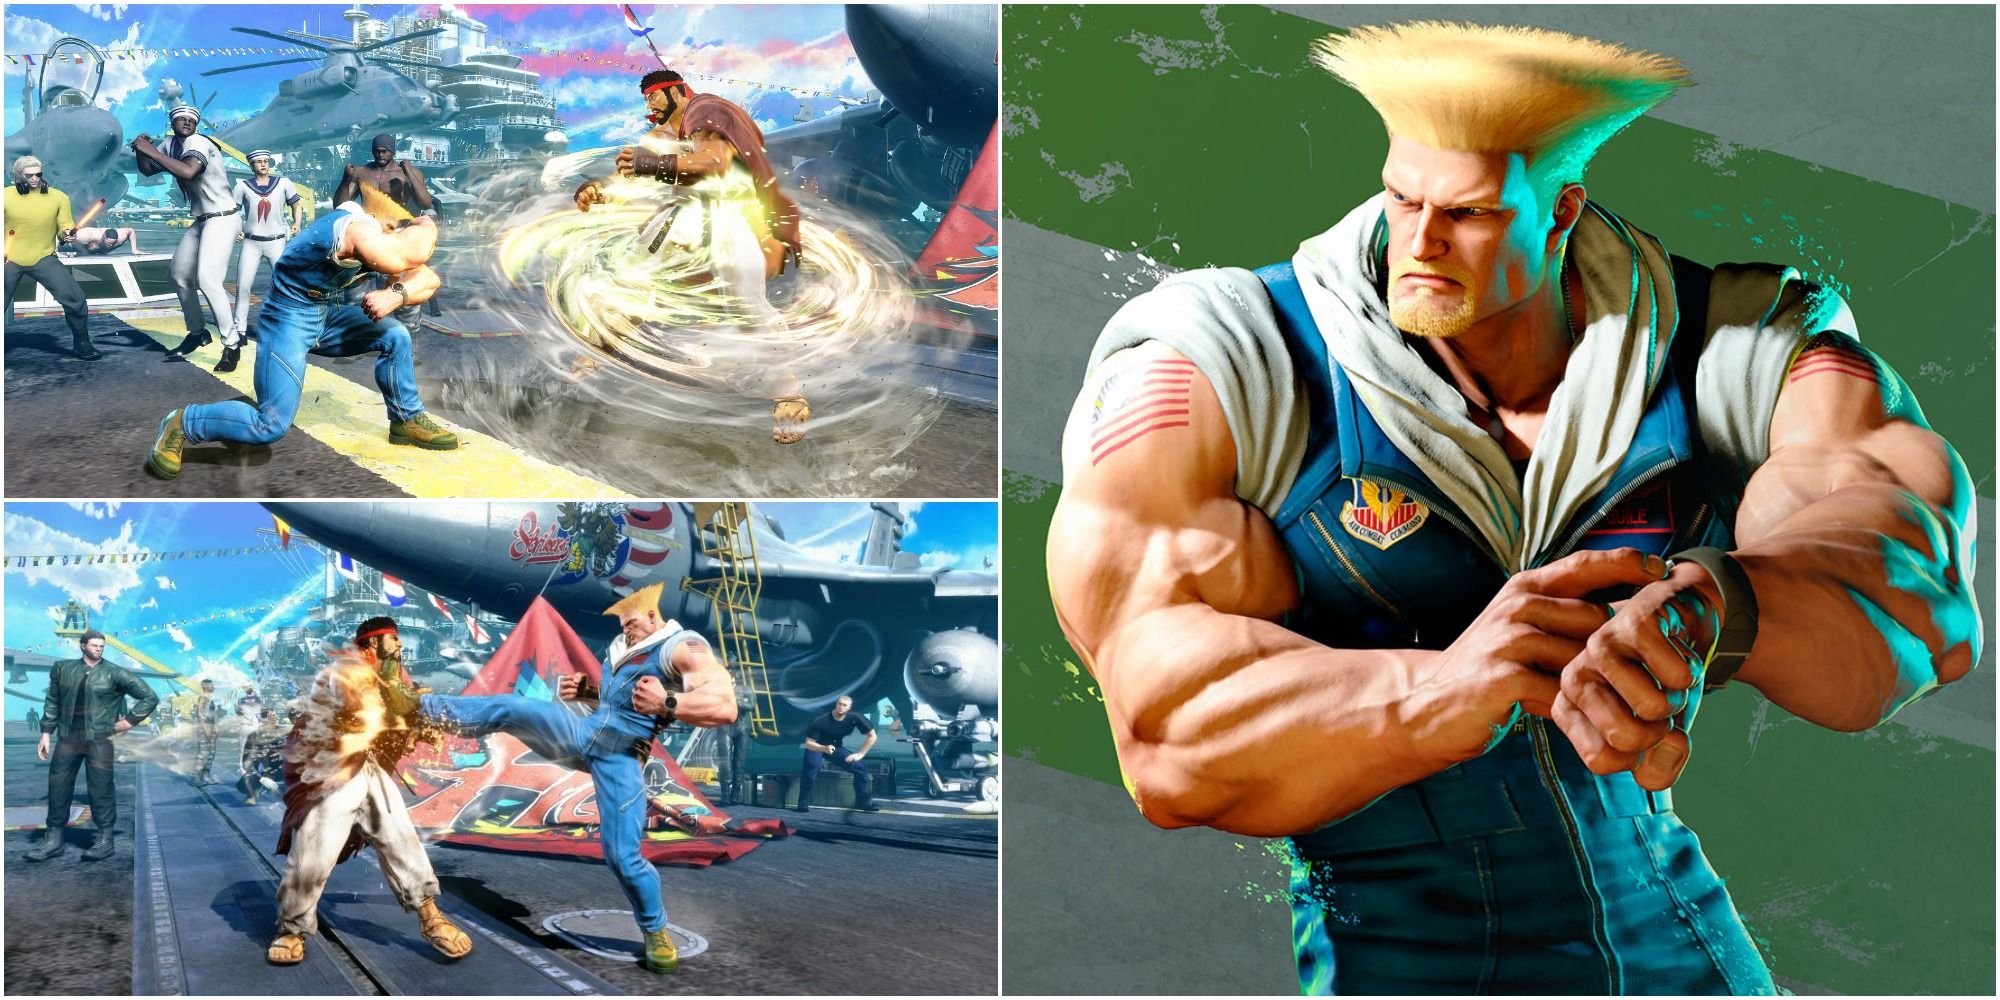 Fascinating Details You Missed In Guile's Street Fighter VI Reveal Trailer